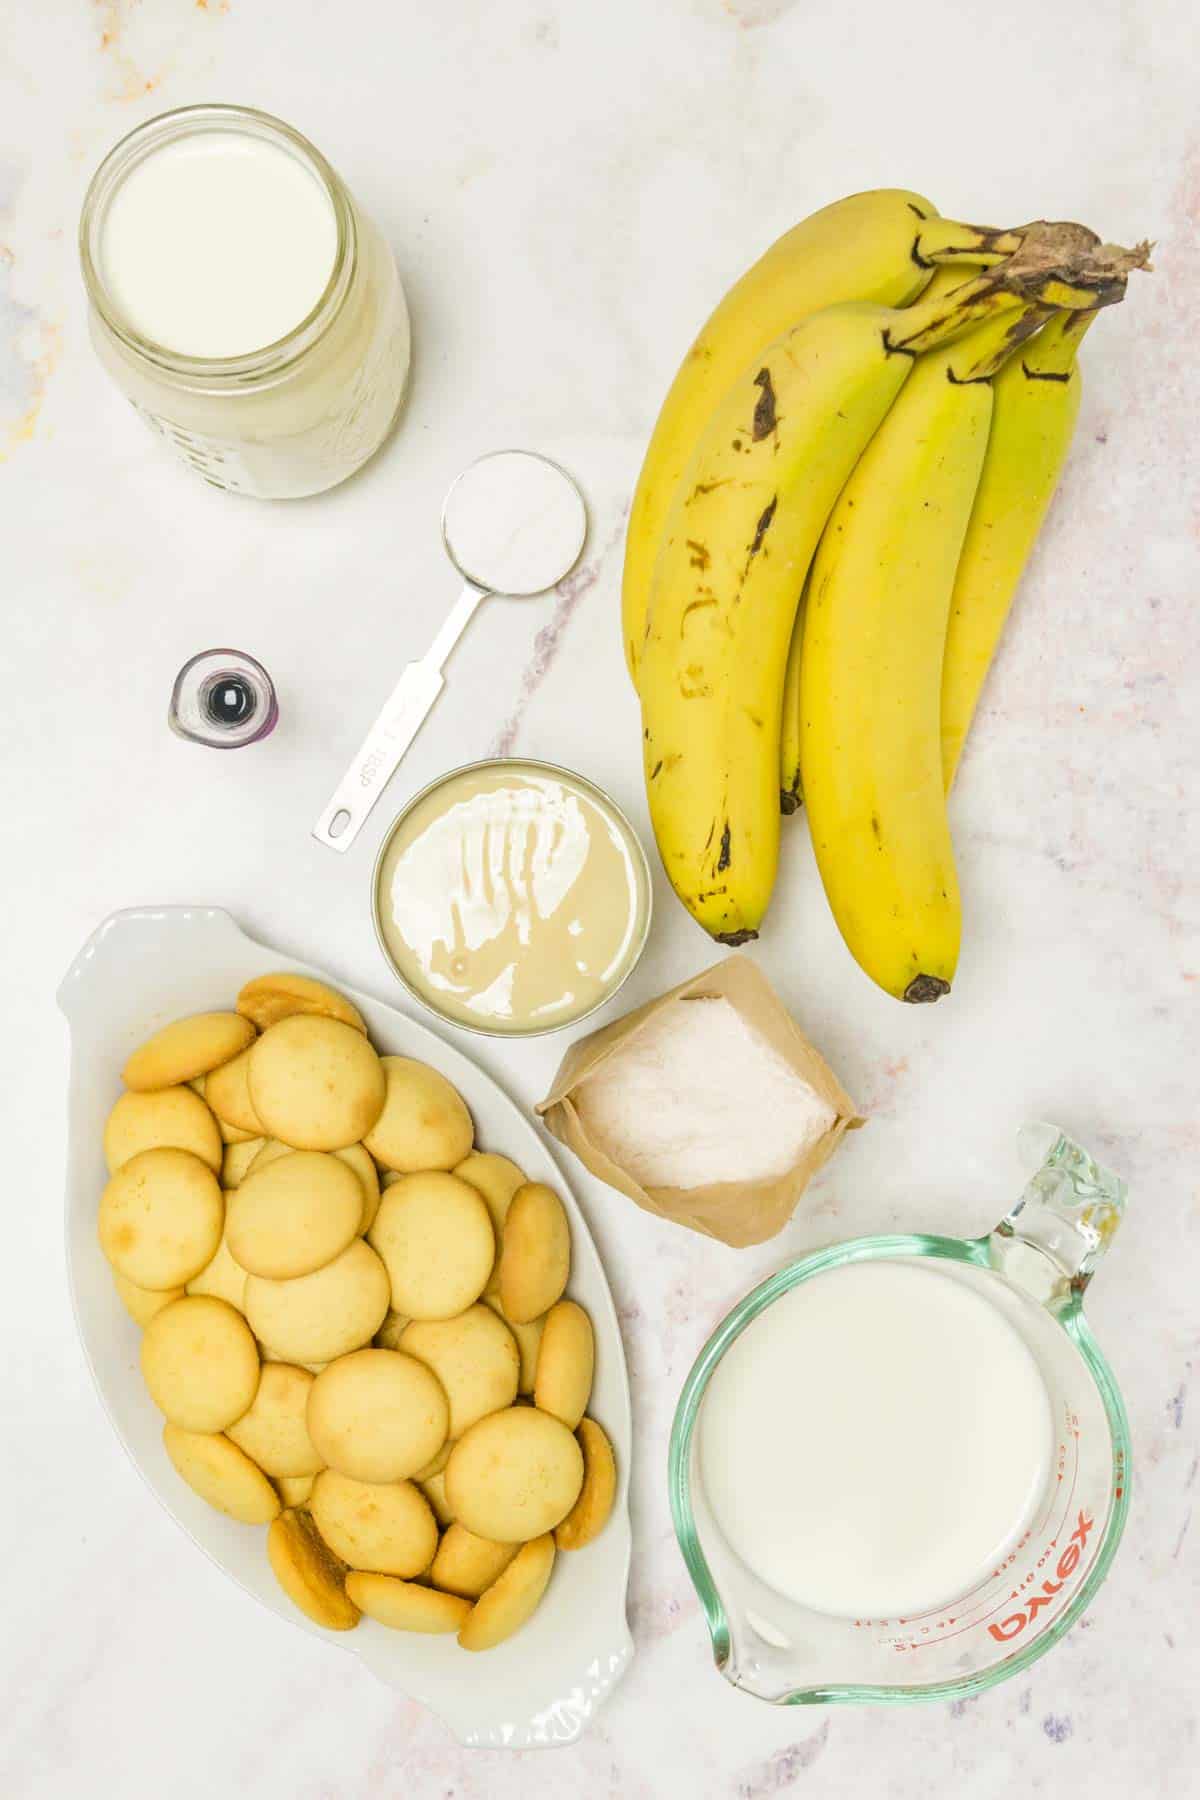 The ingredients for homemade gluten-free banana pudding.